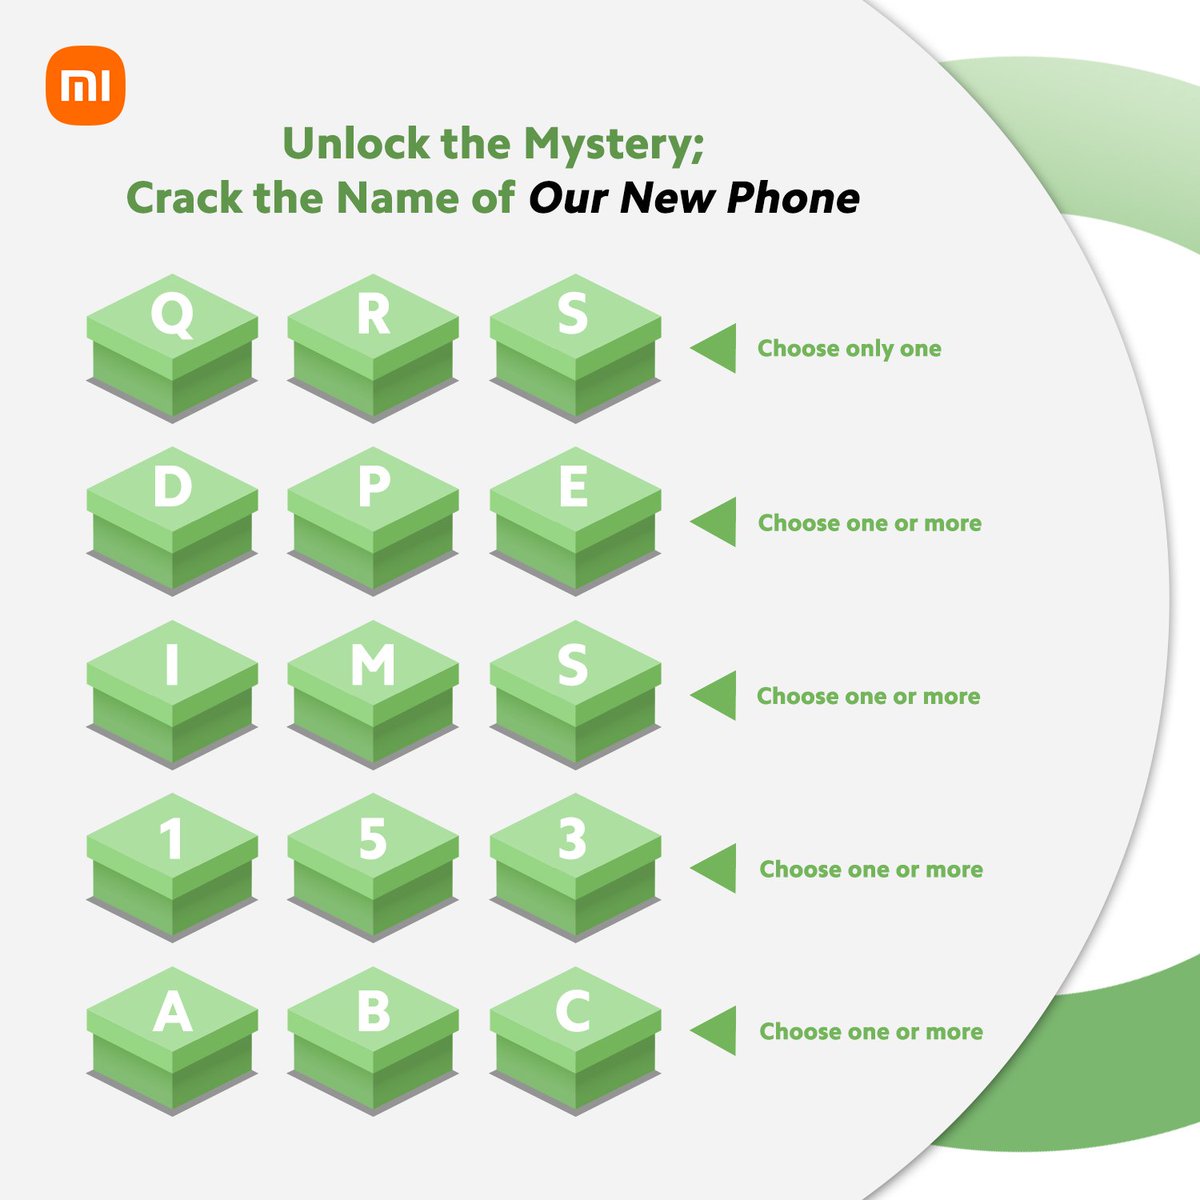 We are wrapping the year with another tech marvel.

Can you take a wild guess at the name of our newest phone and win a FREE Redmi Earbud.

Hint: Follow poster details 

#UnlockTheMystery